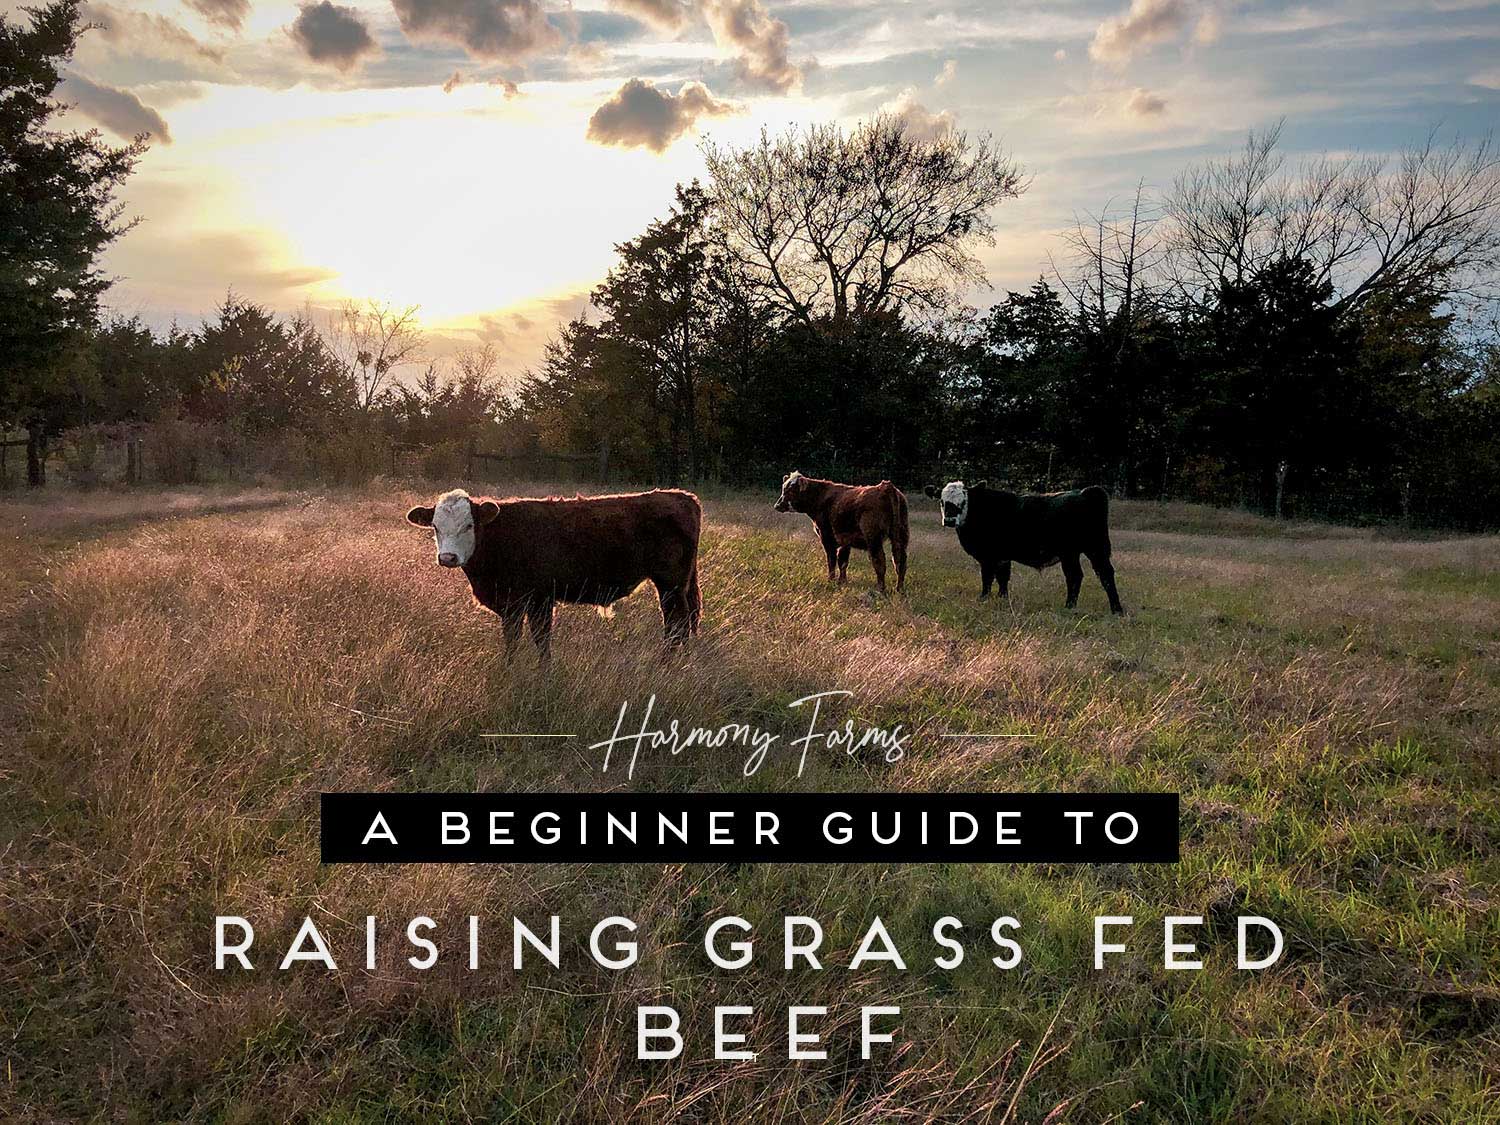 How to Raise Grass-Fed Beef: Beginner Guide - The Shepherdess